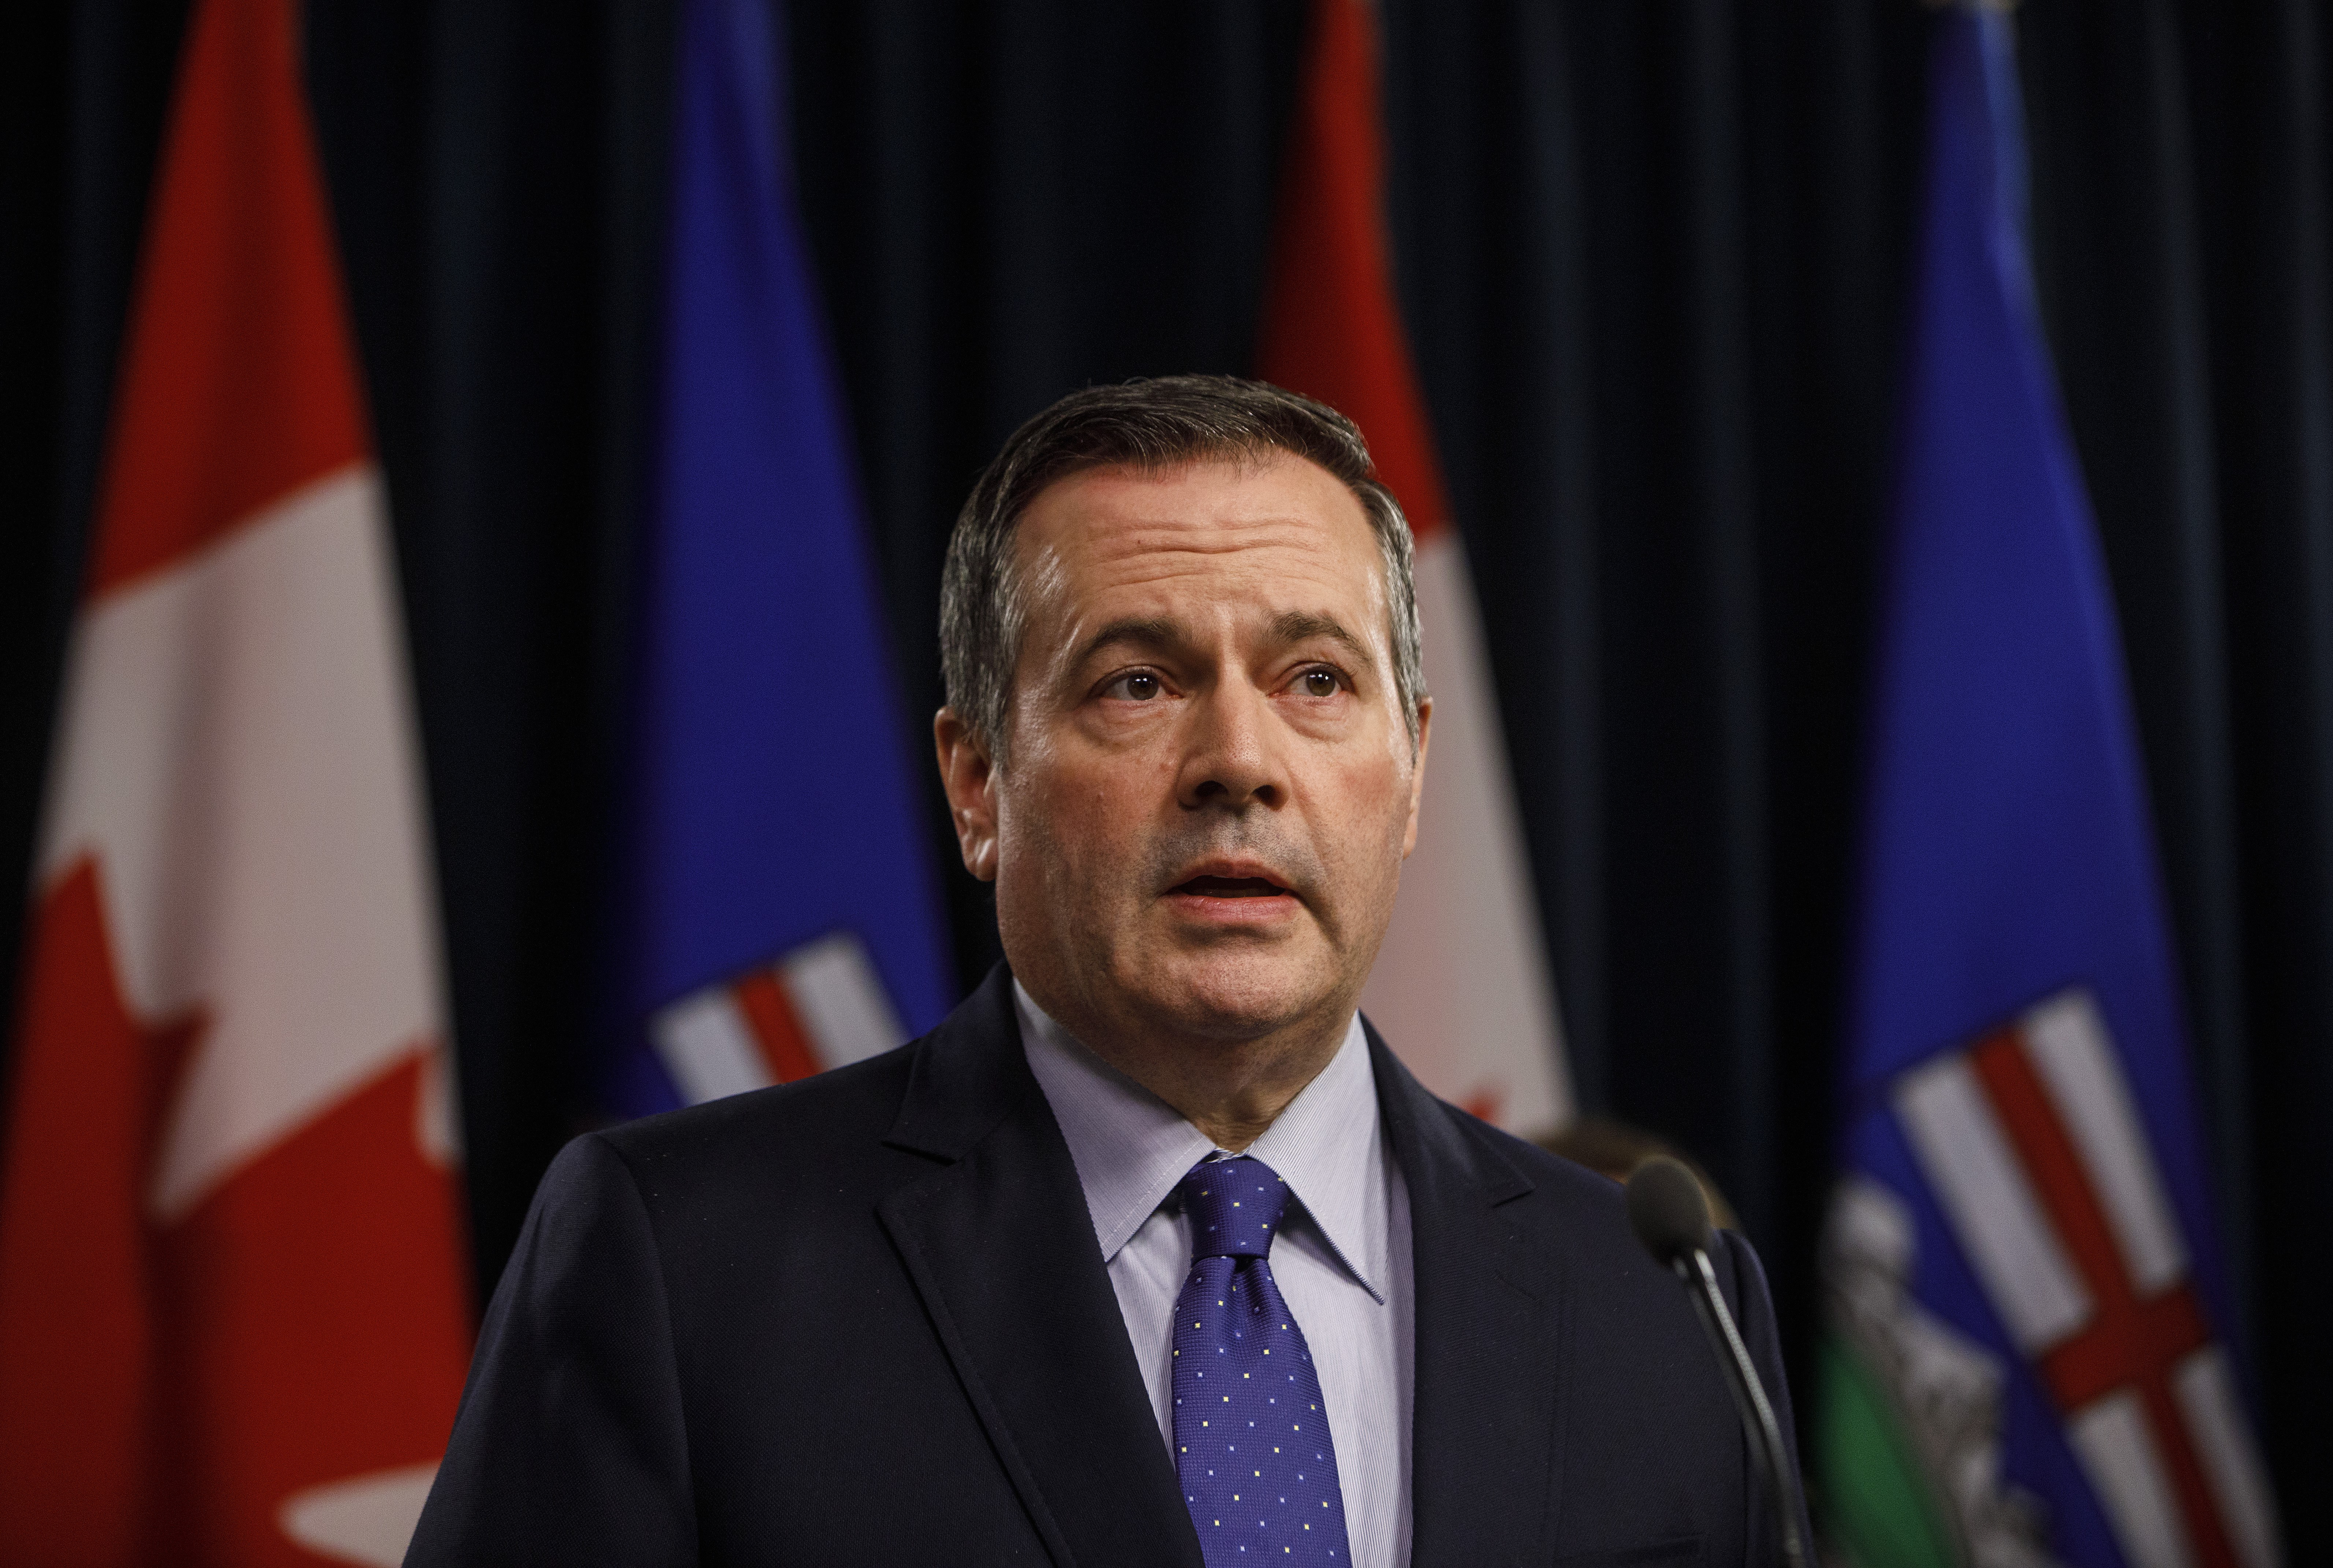 Kenney holds a COVID-19 briefing in Edmonton on March 20, 2020 (CP/Jason Franson)